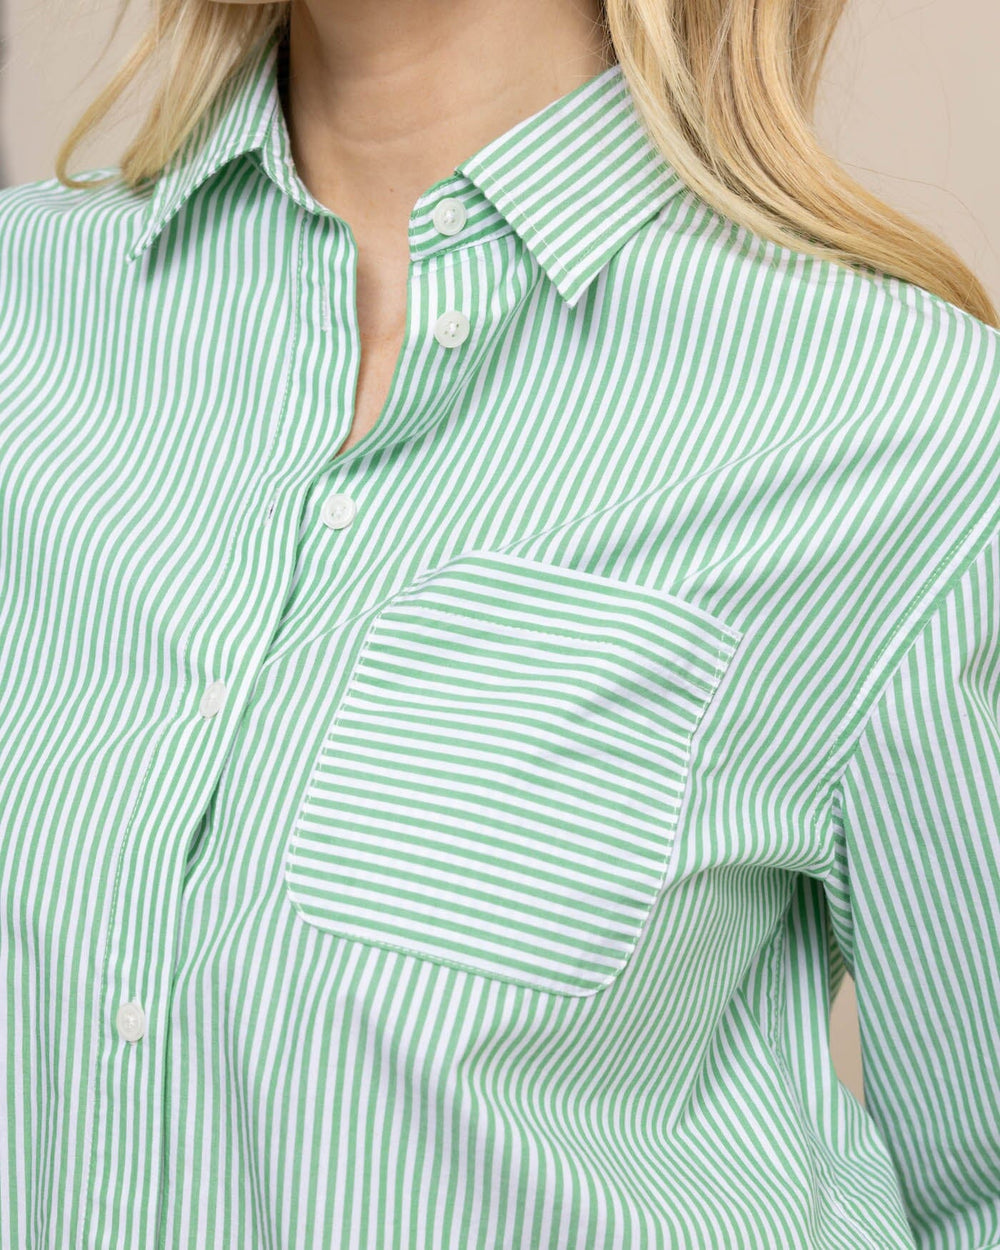 The detail view of the Southern Tide Katherine Stripe Shirt by Southern Tide - Lawn Green